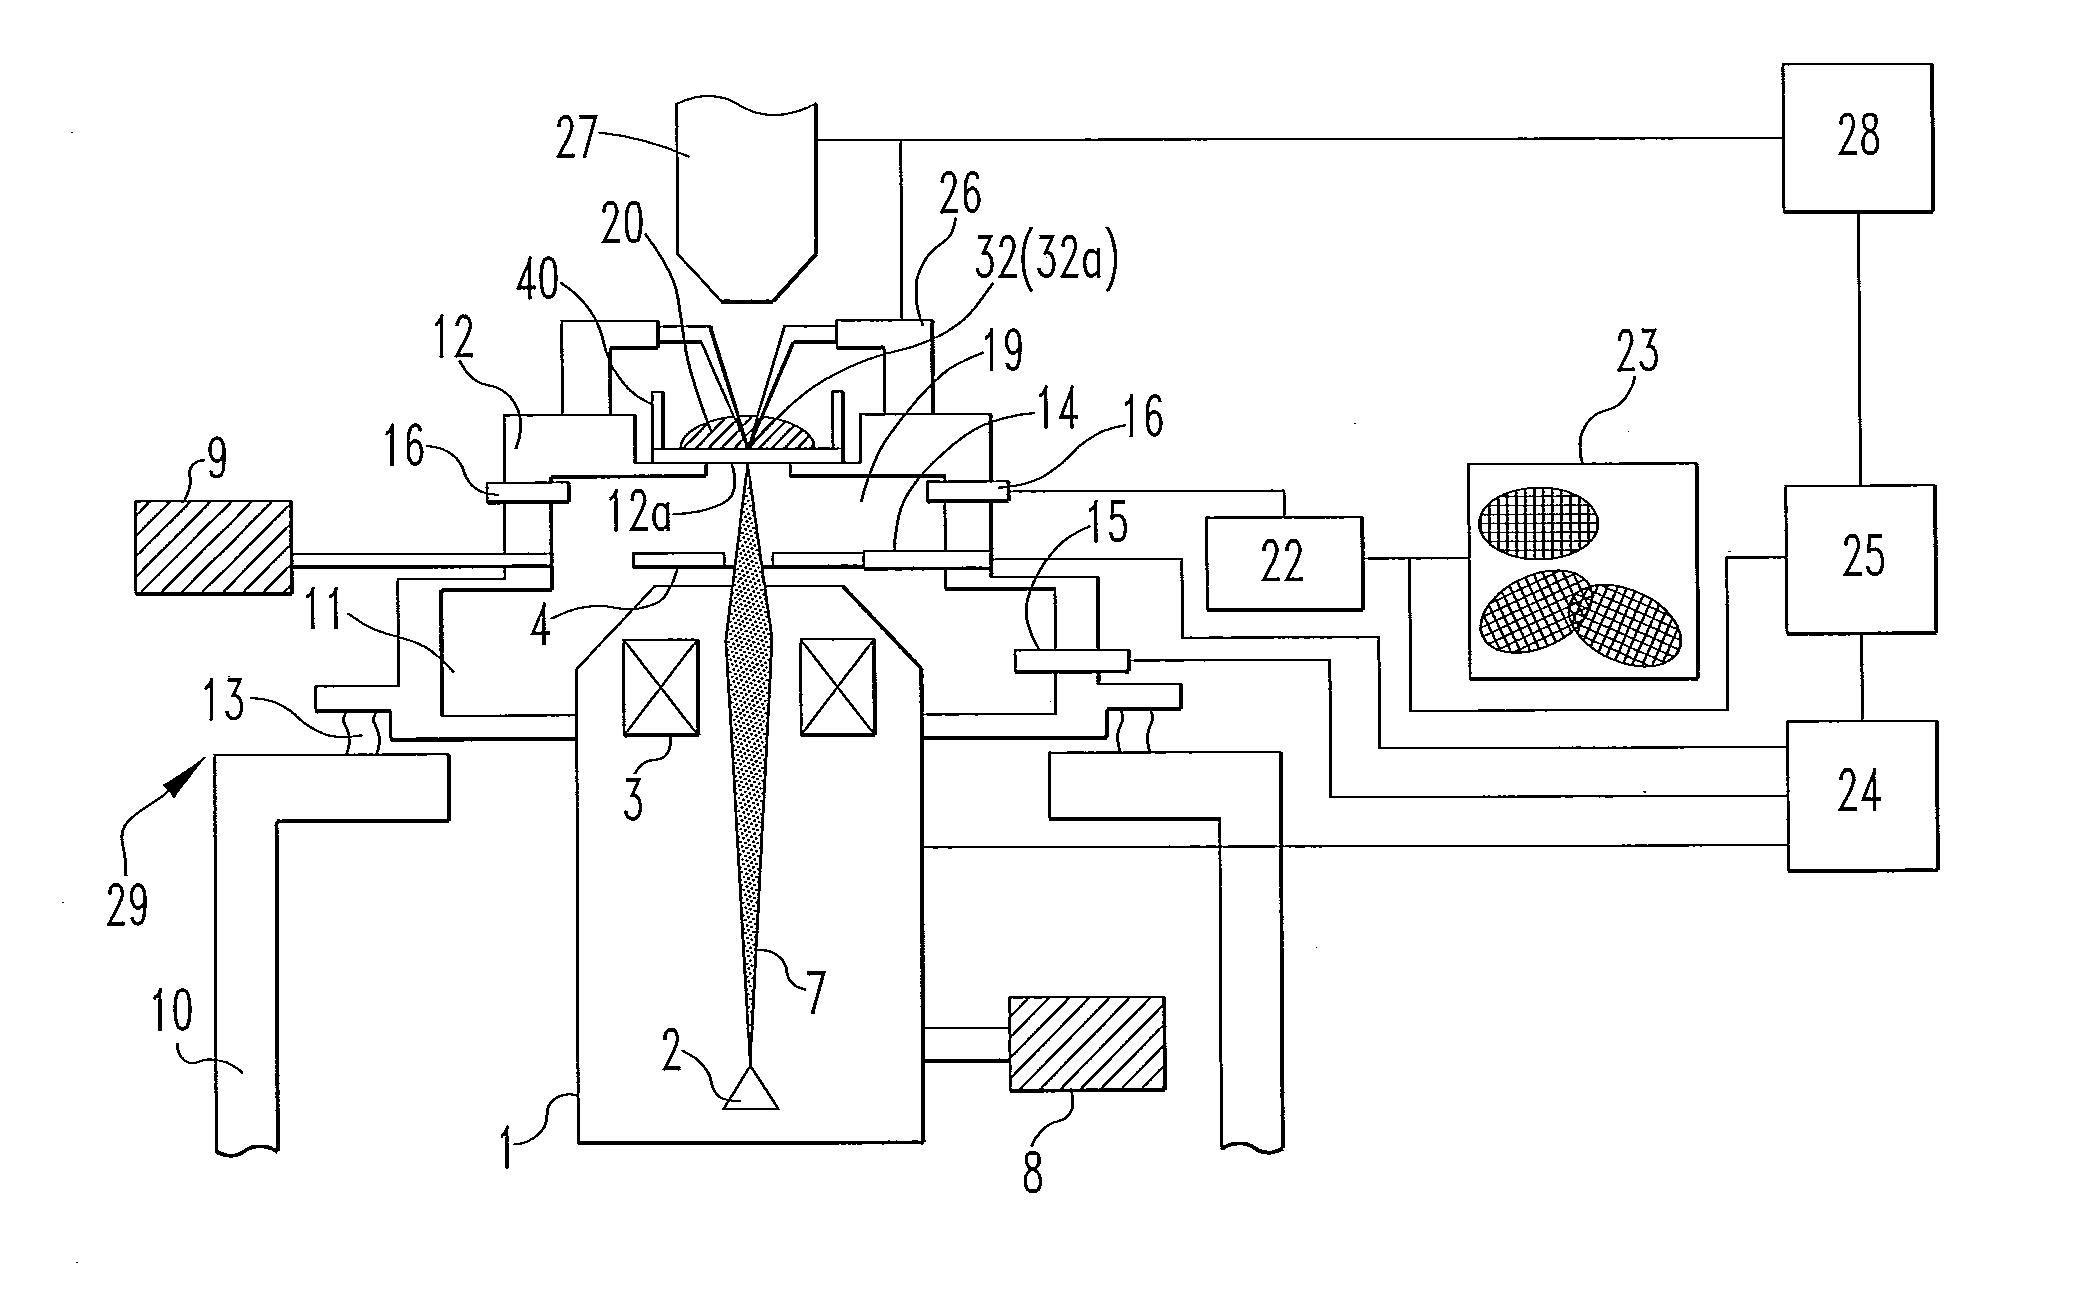 Apparatus and Method for Inspecting Samples